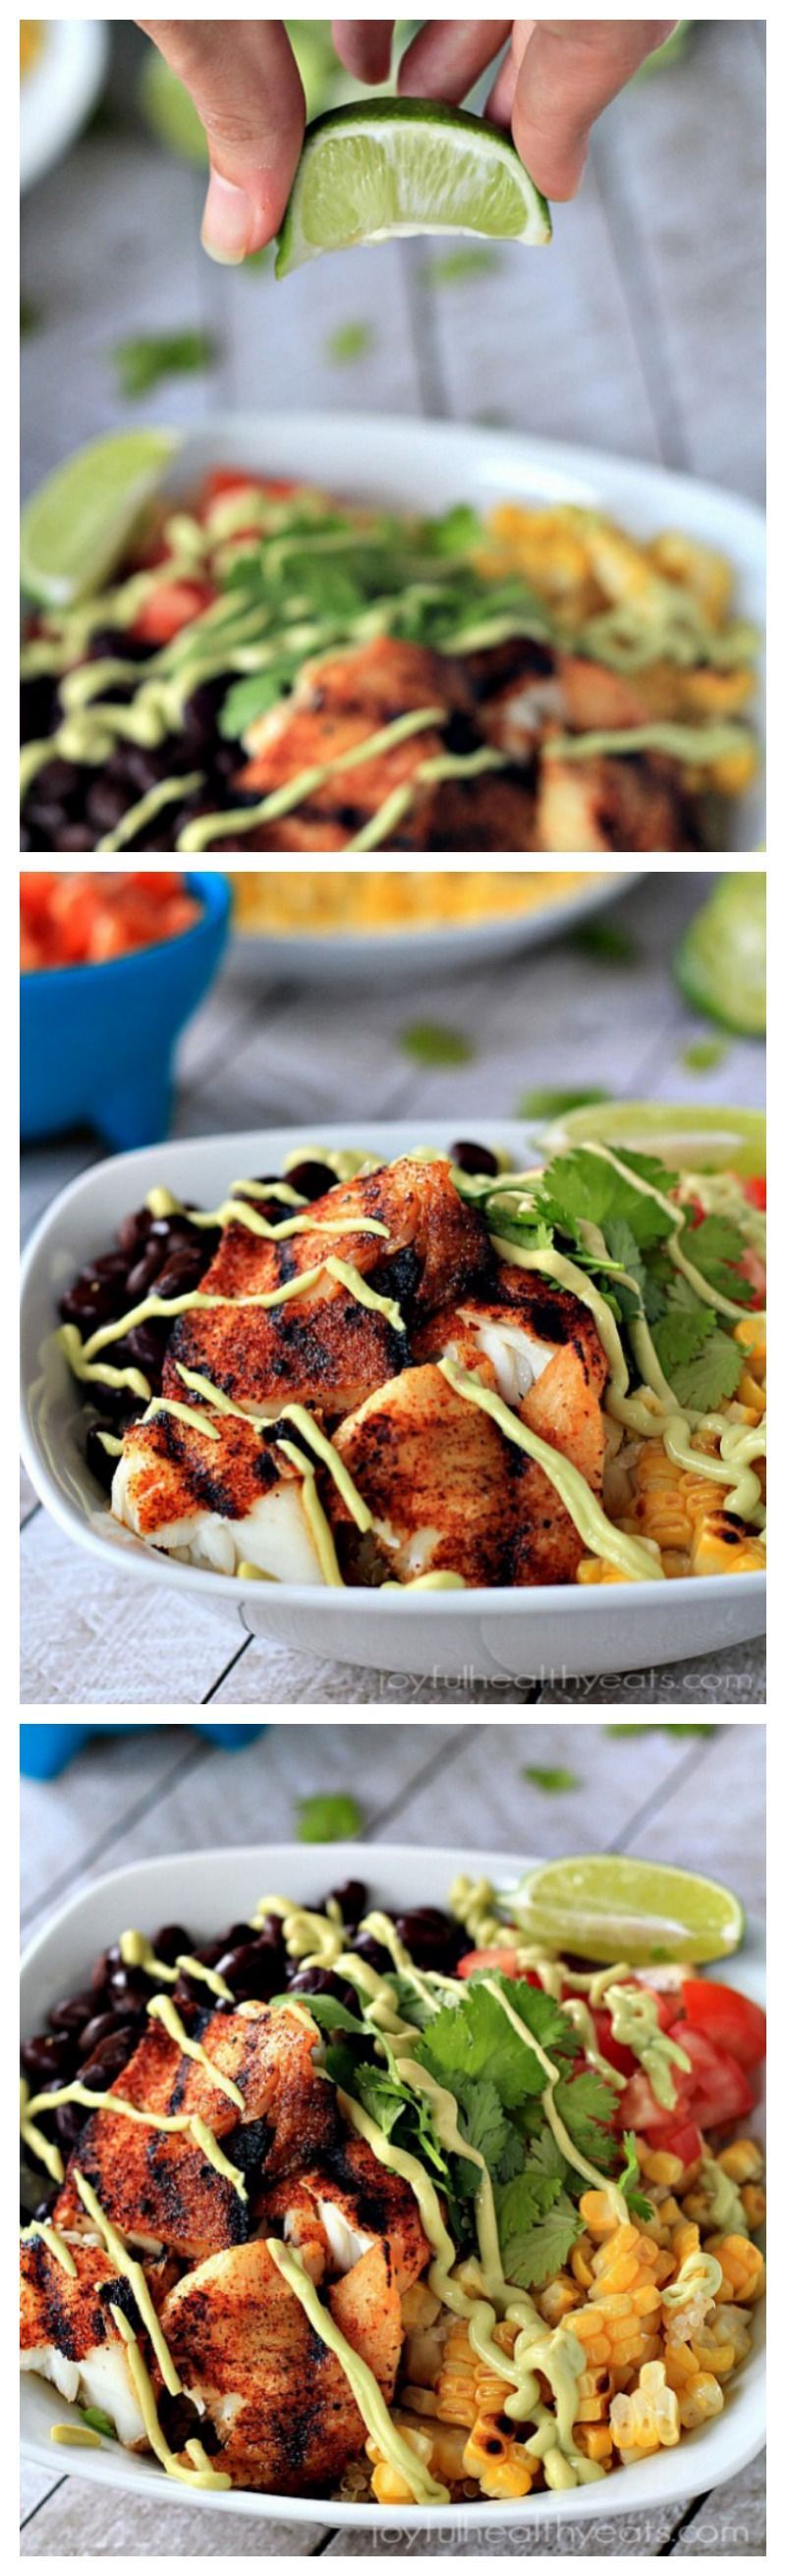 Grilled Tilapia Bowls with Chipotle Avocado Crema // ready in 30 minutes #healthy #lowcarb